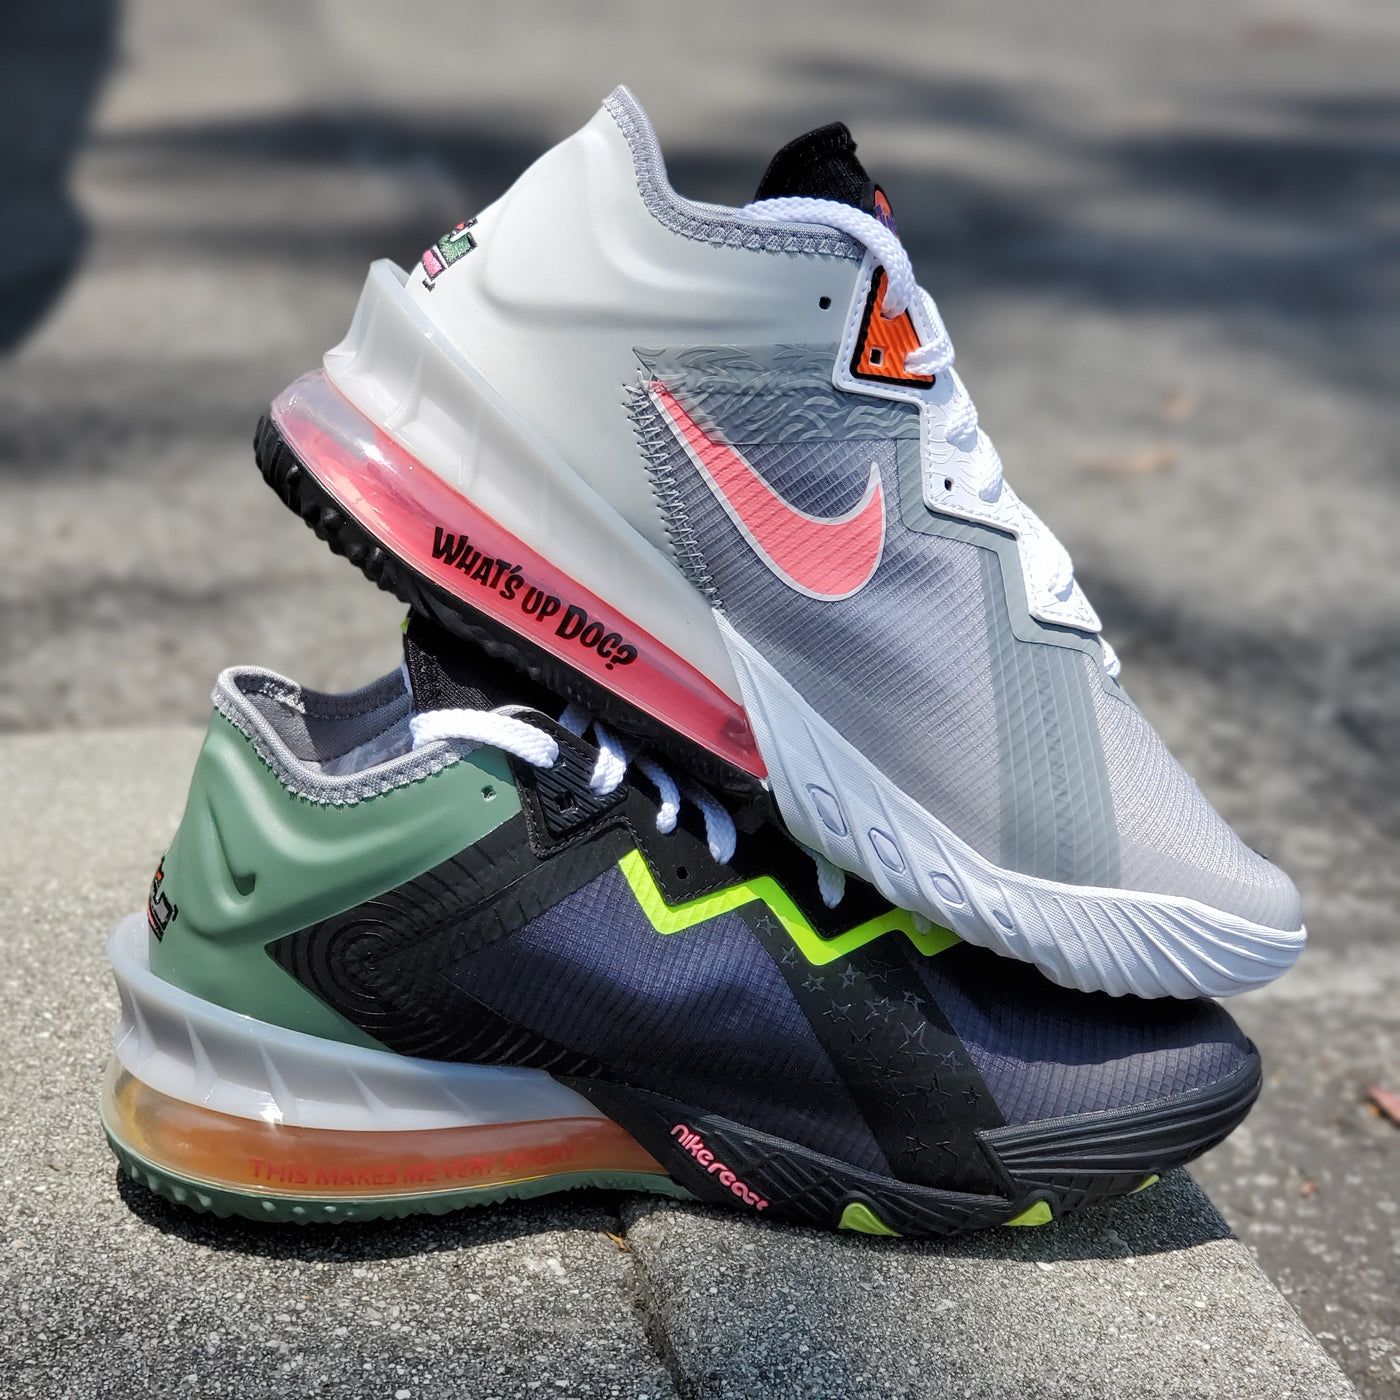 Space Jam x Nike LeBron 18 Low Bugs VS Marvin – PRIVATE SNEAKERS